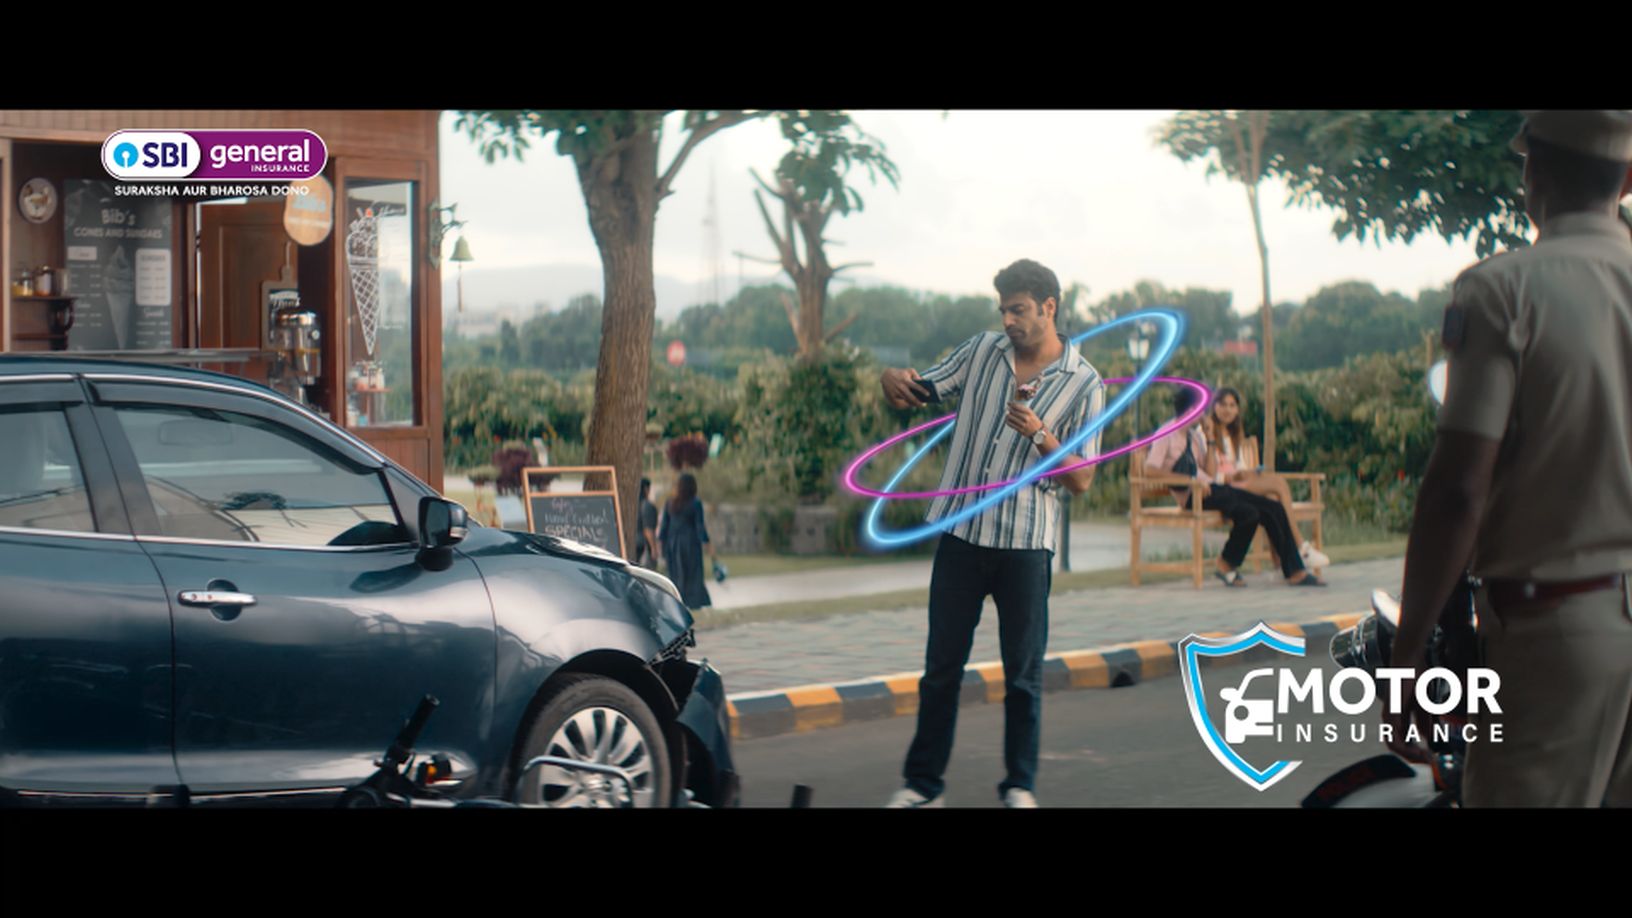 SBI General Insurance launches a new brand campaign across TV andDigitalto strengthen its positioning of Suraksha aurBharosa Dono